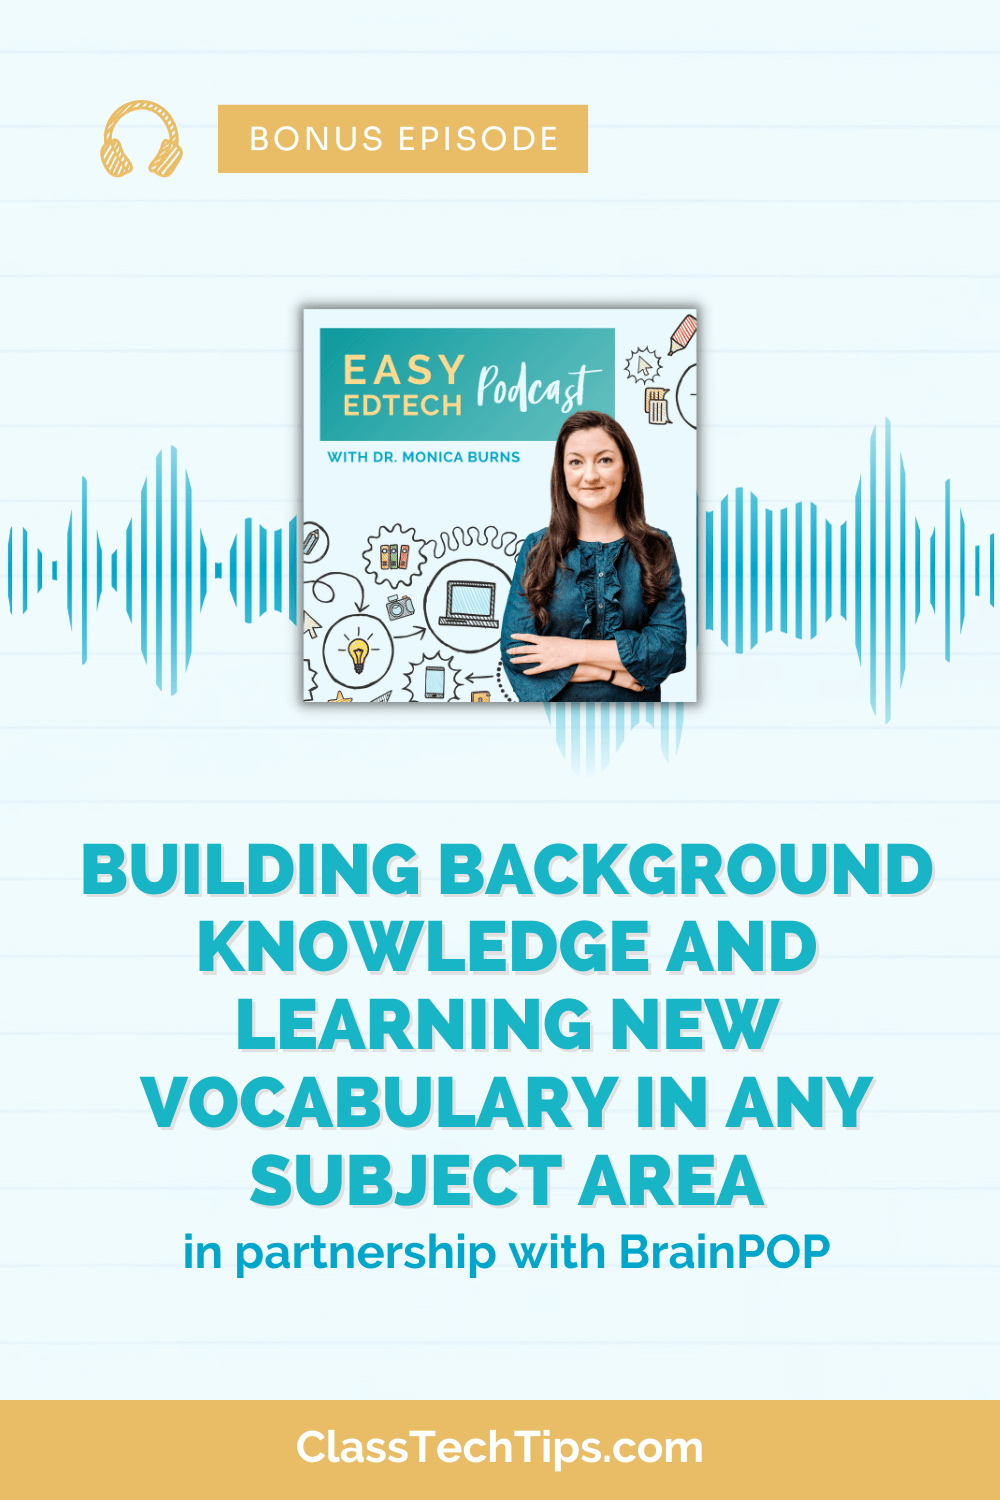 Image for a podcast episode with guest Karina Linch, highlighting the use of BrainPOP's educational videos for building literacy skills, accompanied by the podcast logo.